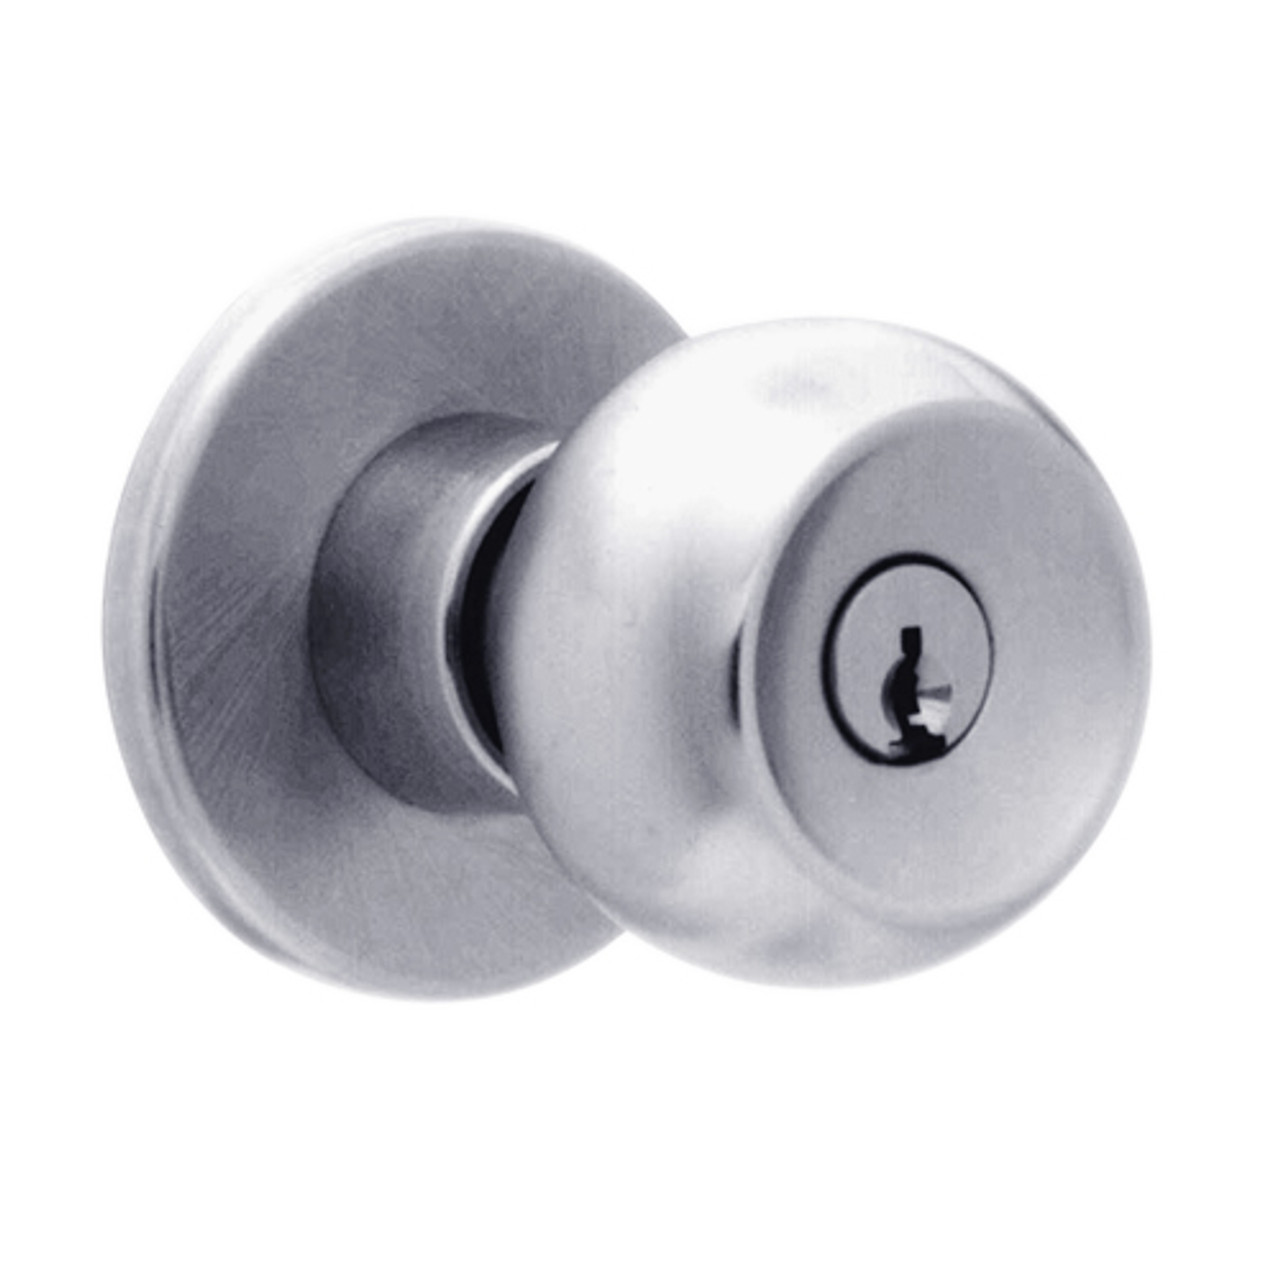 X571PD-TG-626 Falcon X Series Cylindrical Dormitory Lock with Troy-Gala Knob Style in Satin Chrome Finish